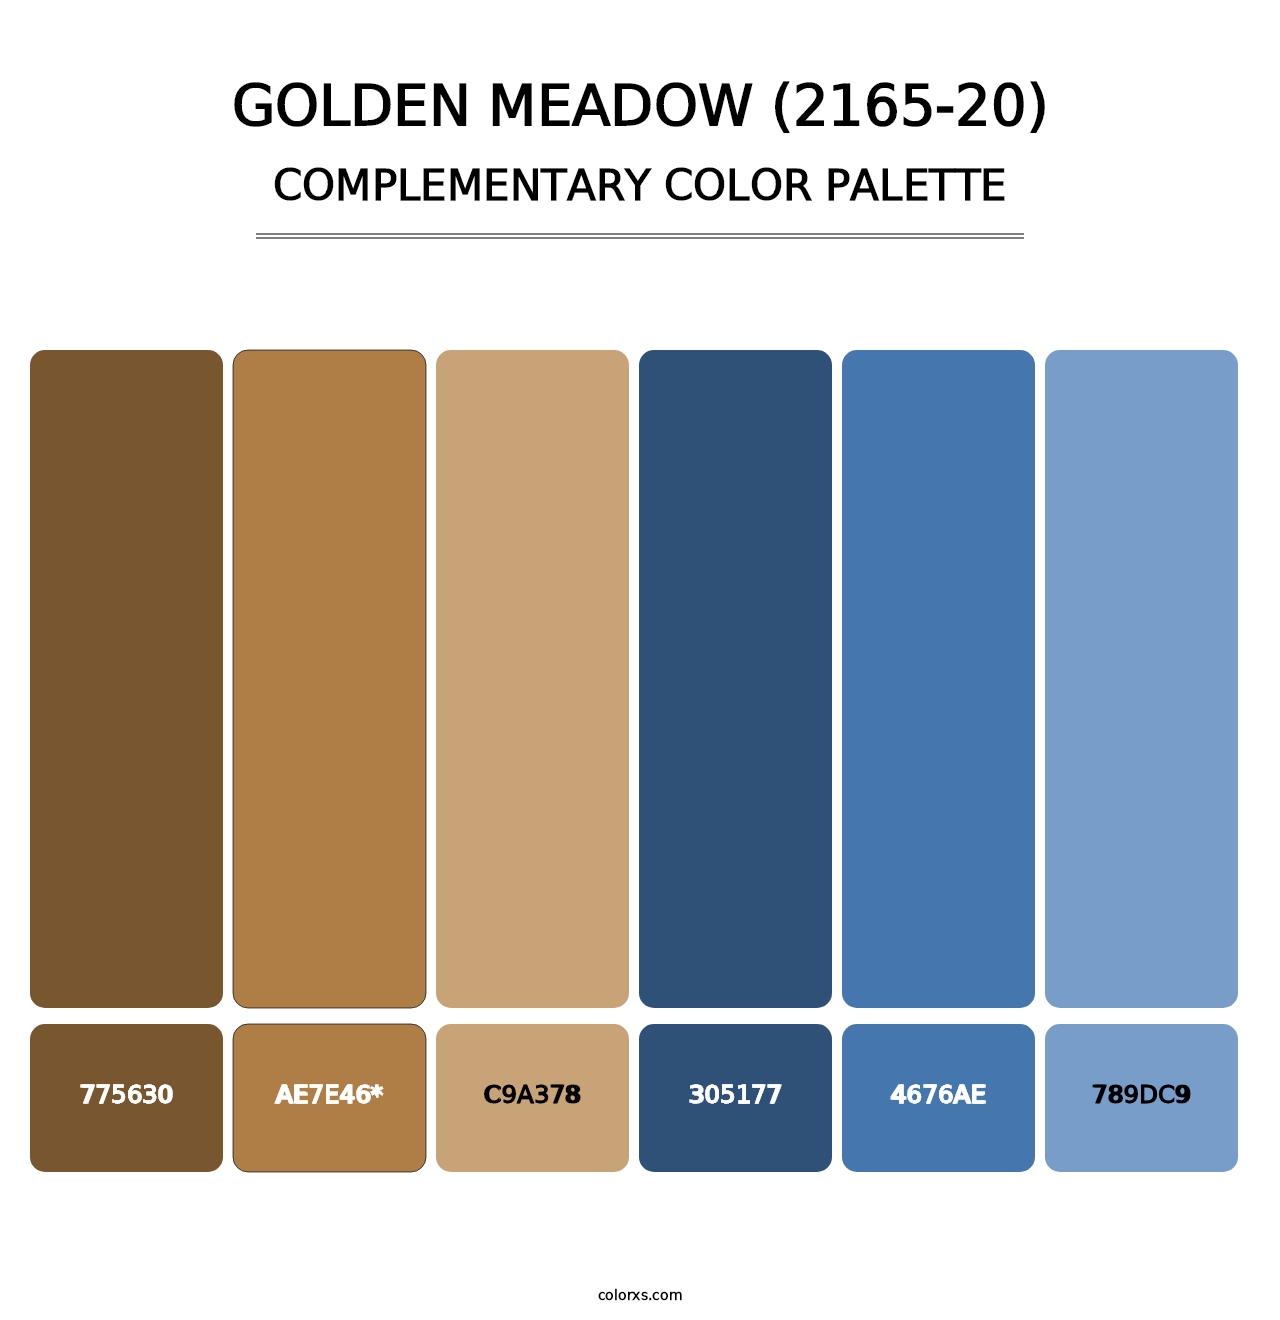 Golden Meadow (2165-20) - Complementary Color Palette